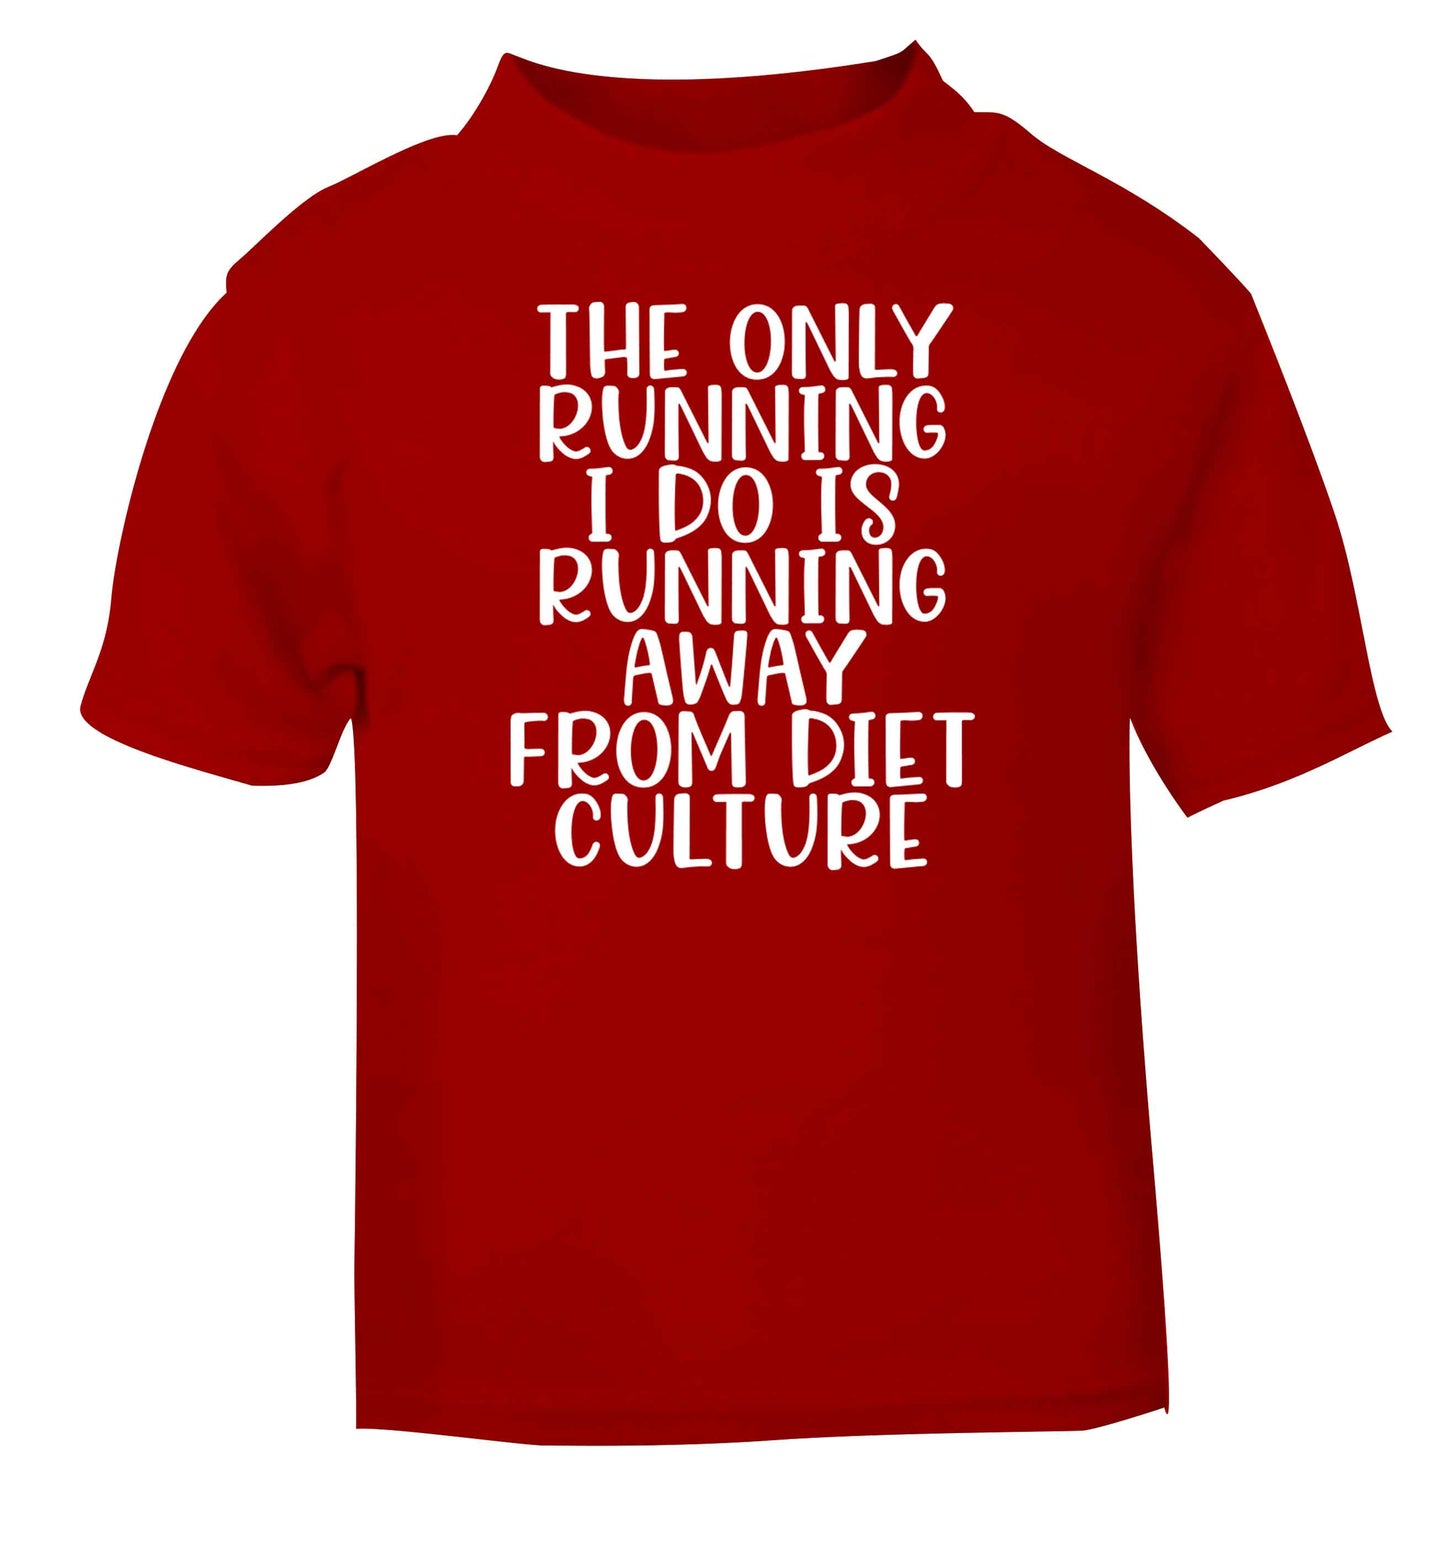 The only running I do is running away from diet culture red baby toddler Tshirt 2 Years